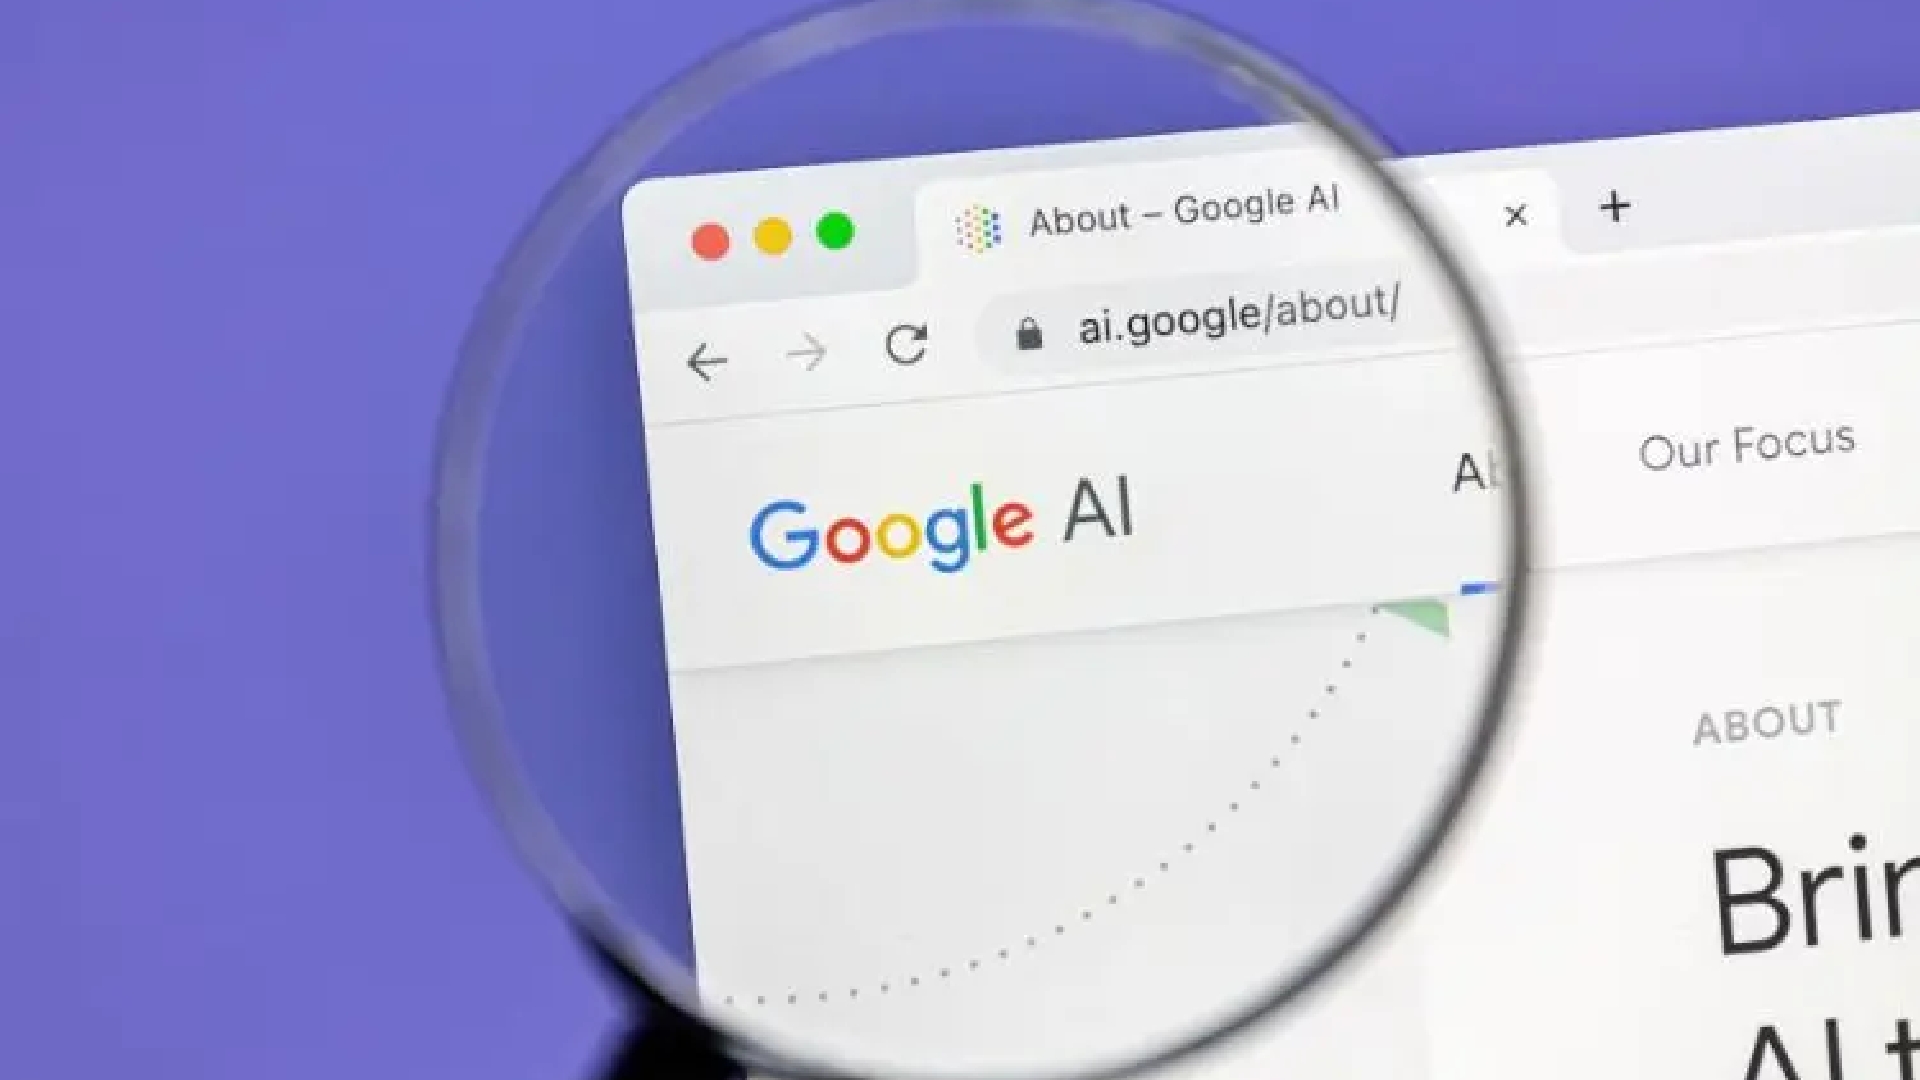 Utilizing generative AI, Google Chrome will soon be able to summarize content.